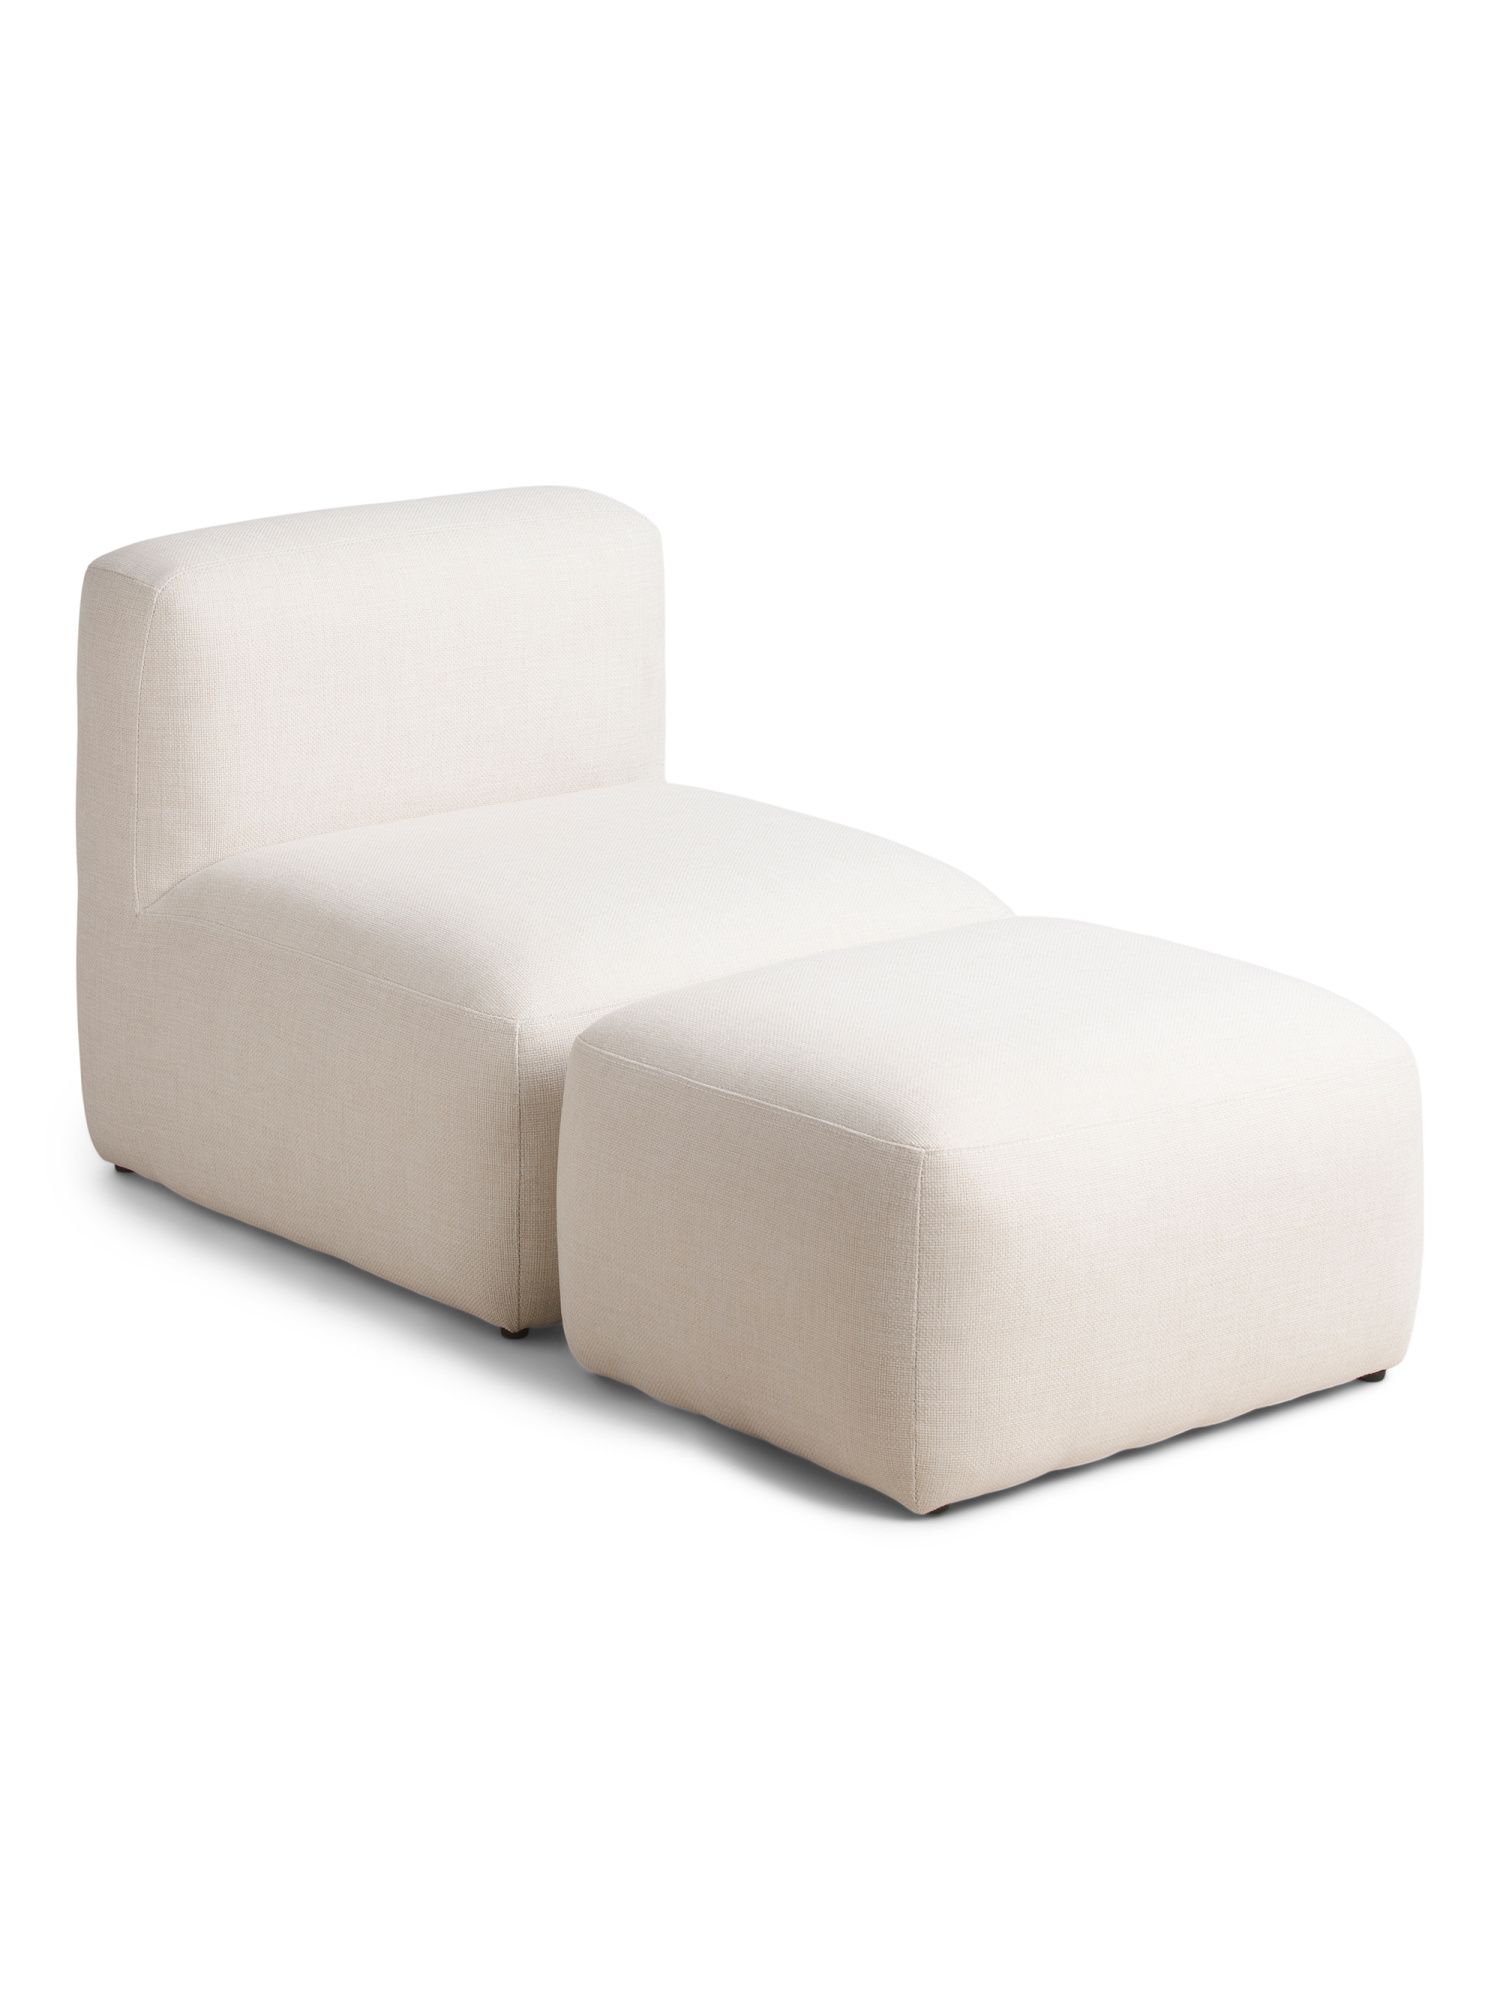 Outdoor Upholstered Chair And Ottoman Set | Marshalls